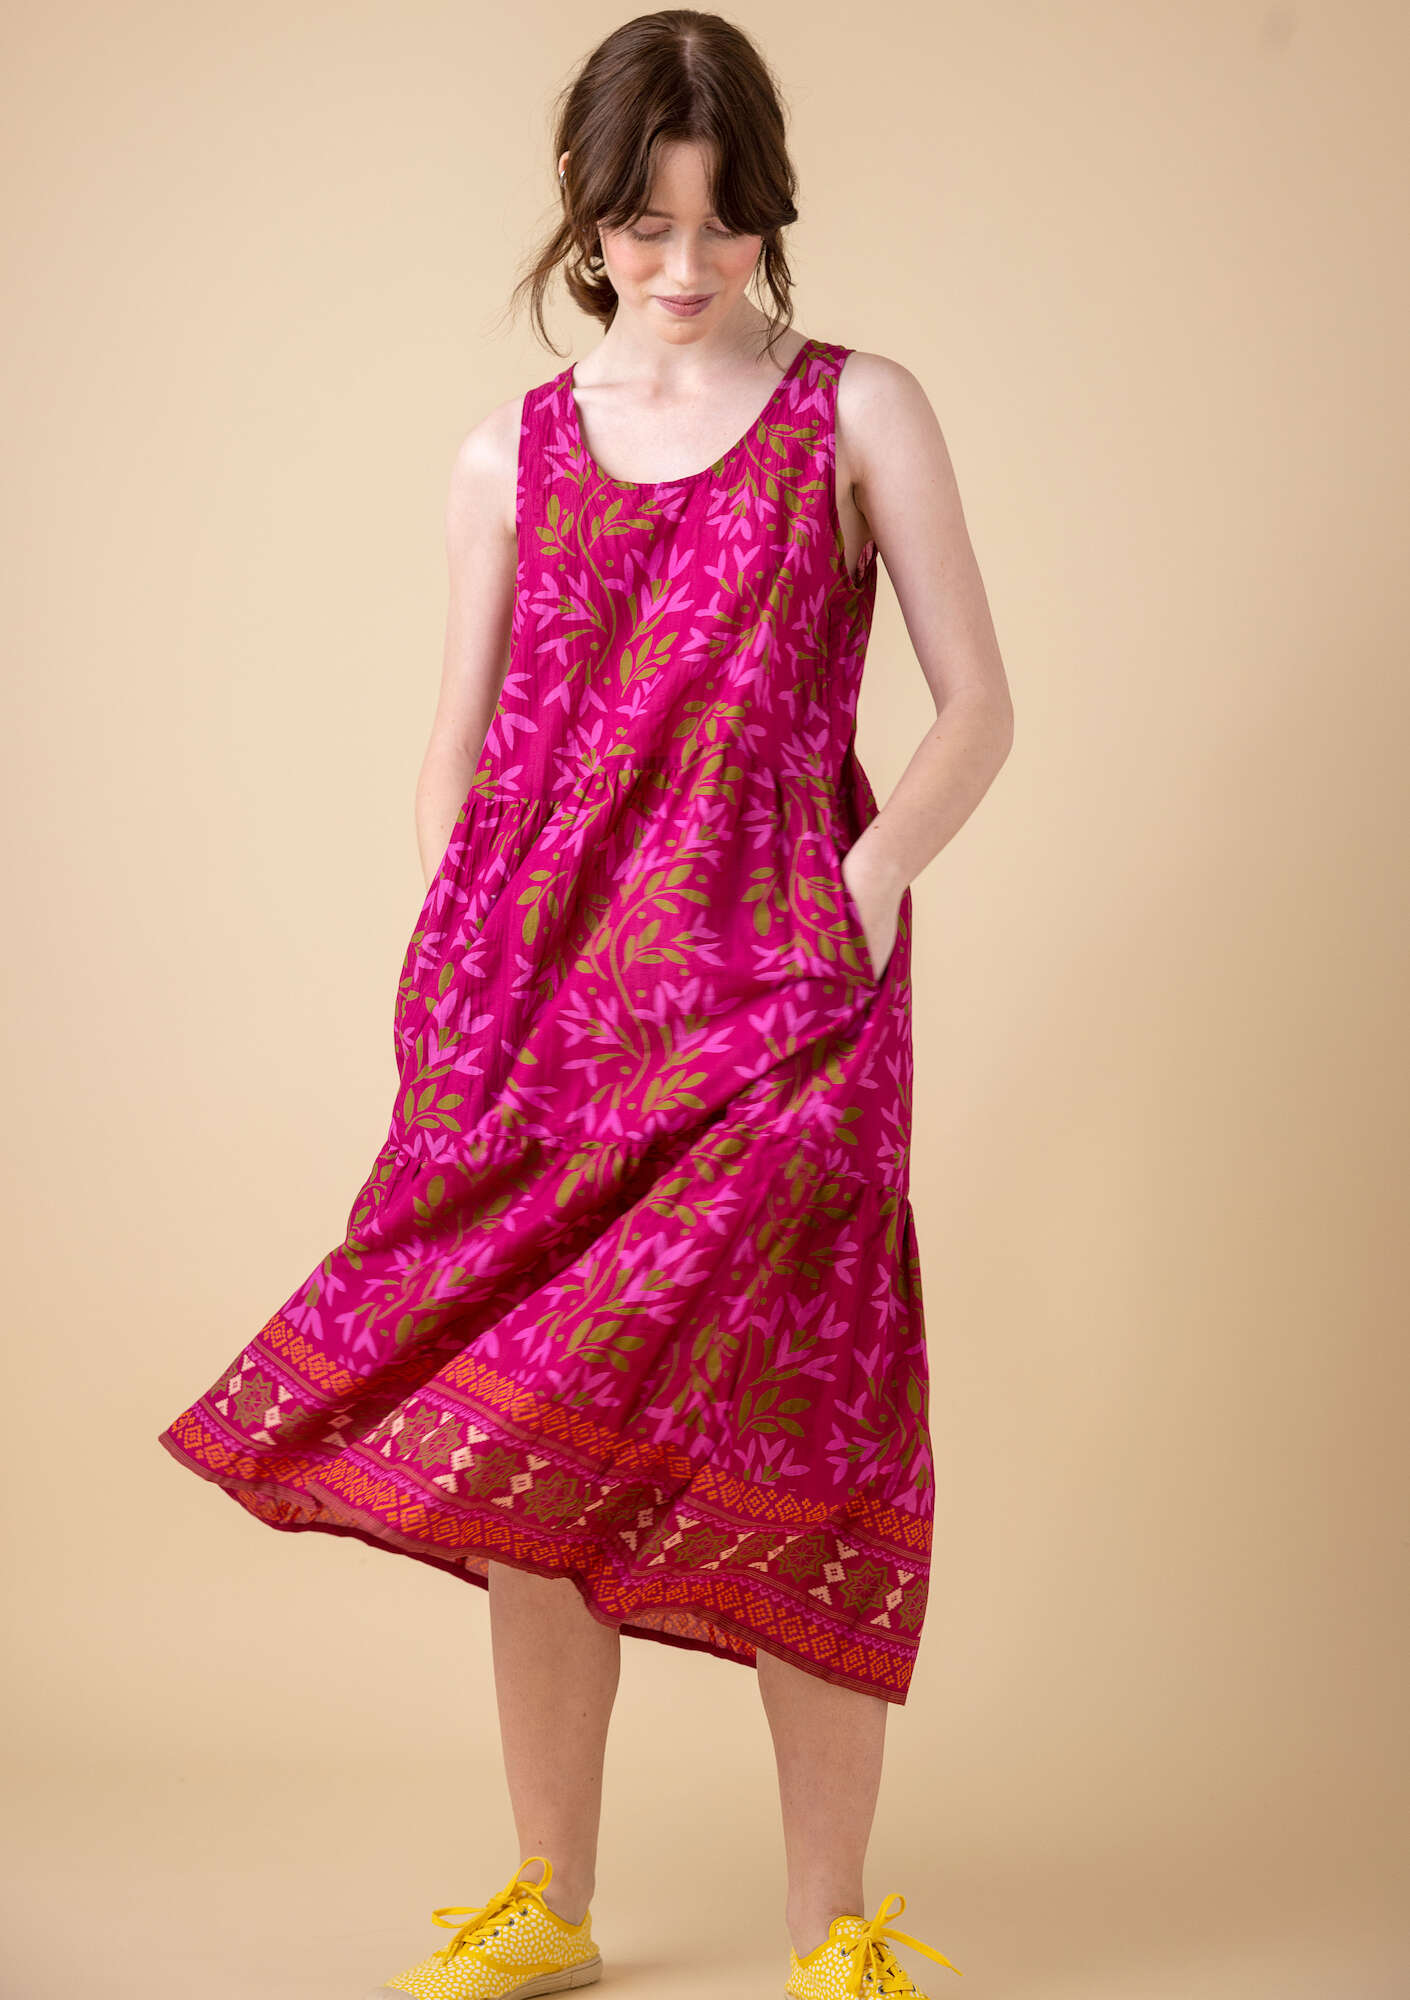 Woven dress pink orchid